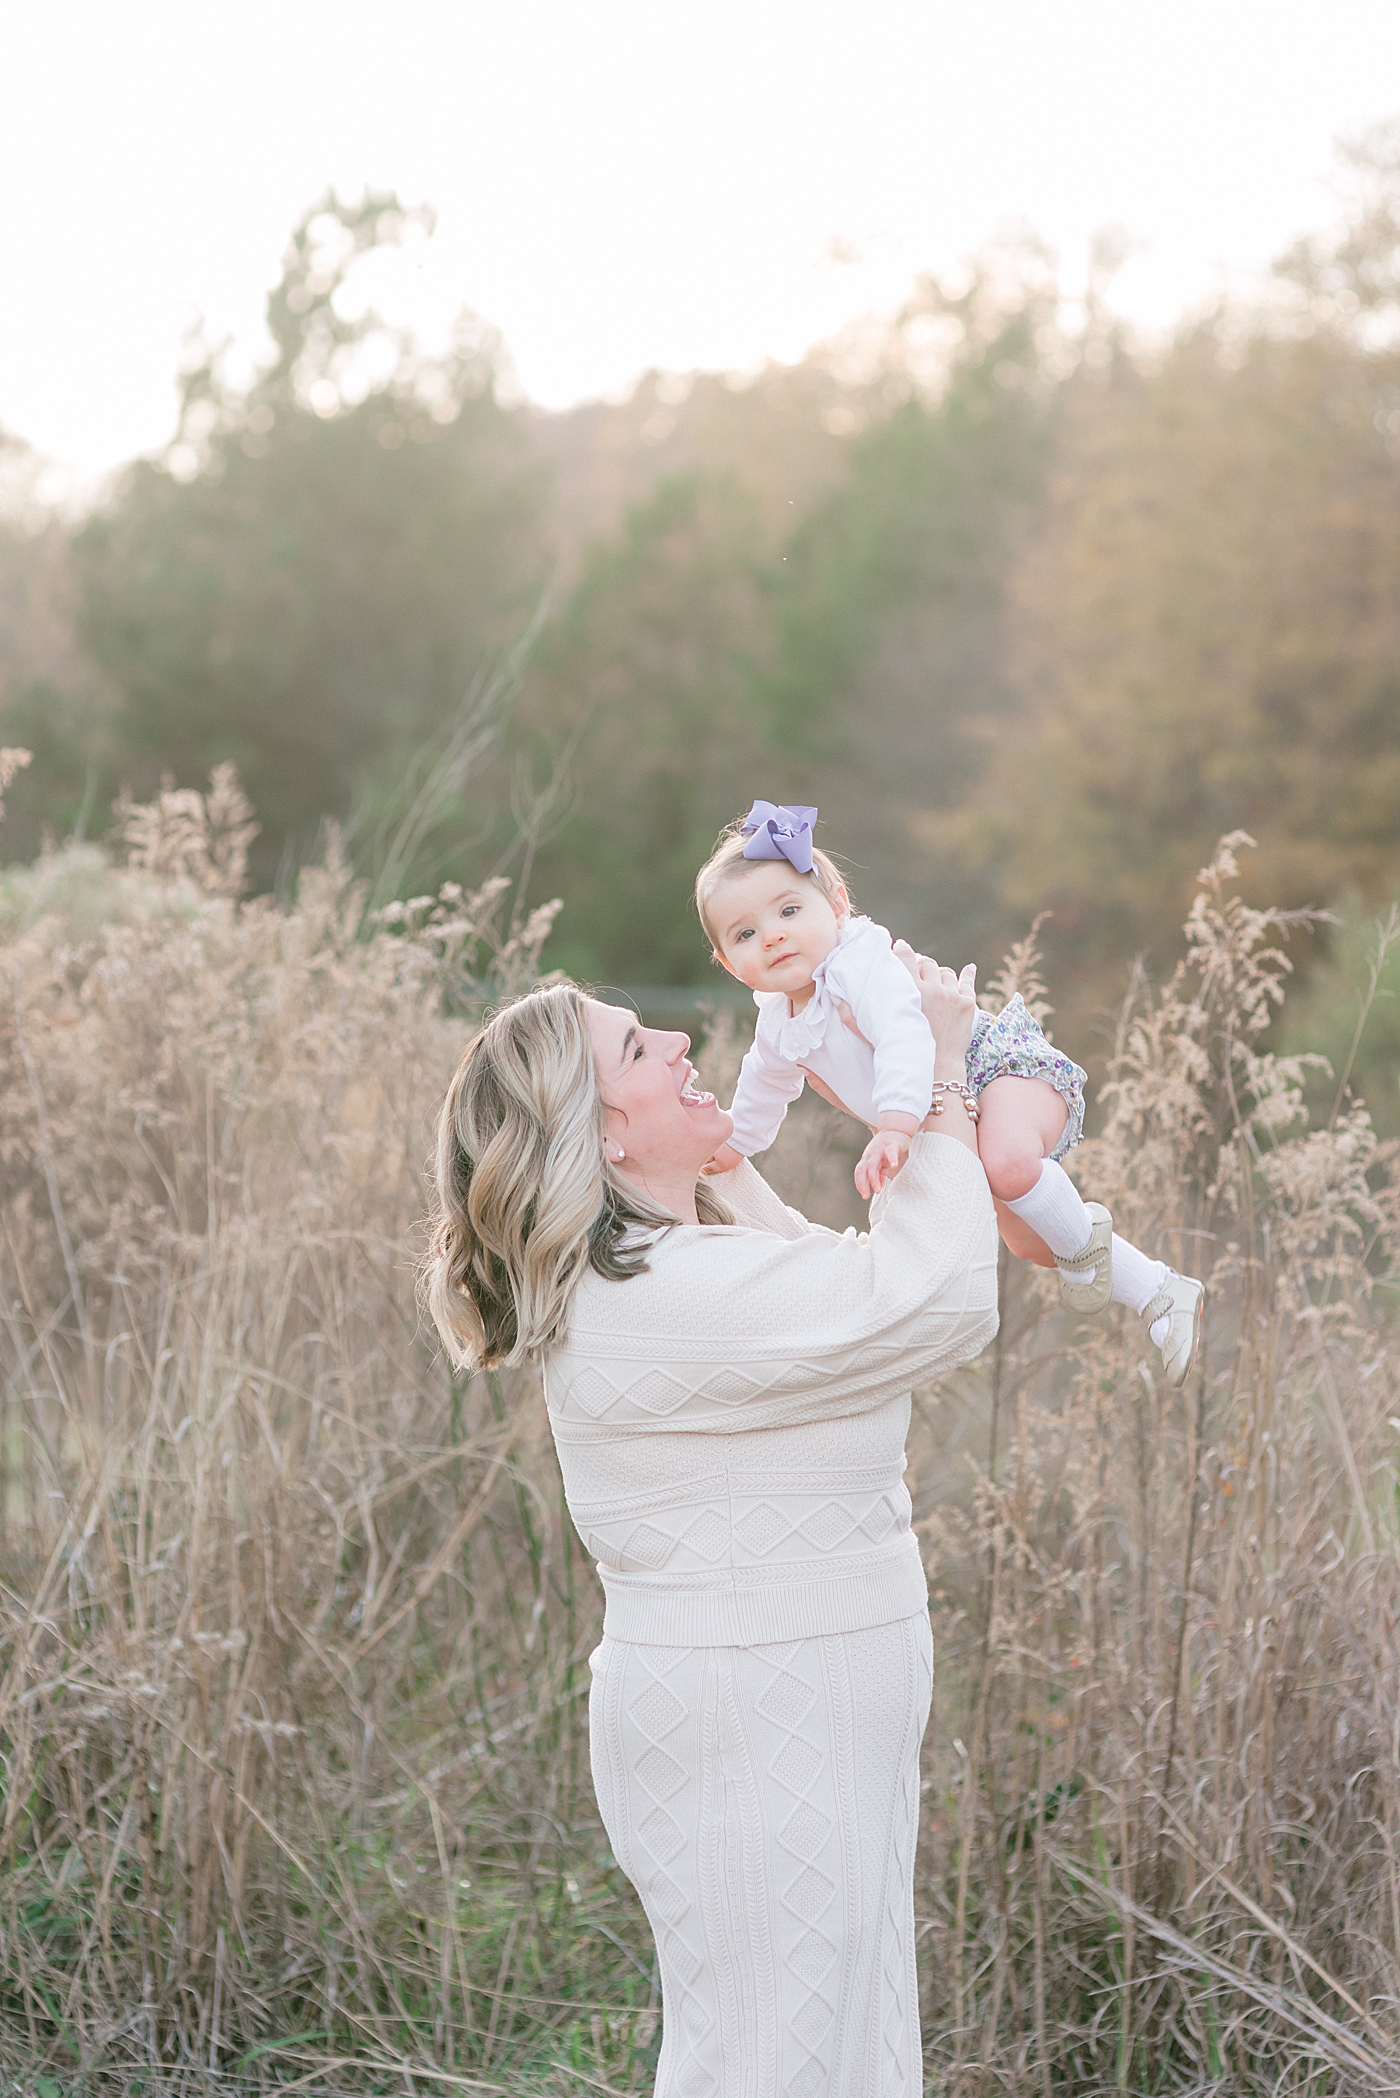 Mom playing airplane with baby girl in floral bloomers | Photo by Anna Wisjo Photography 